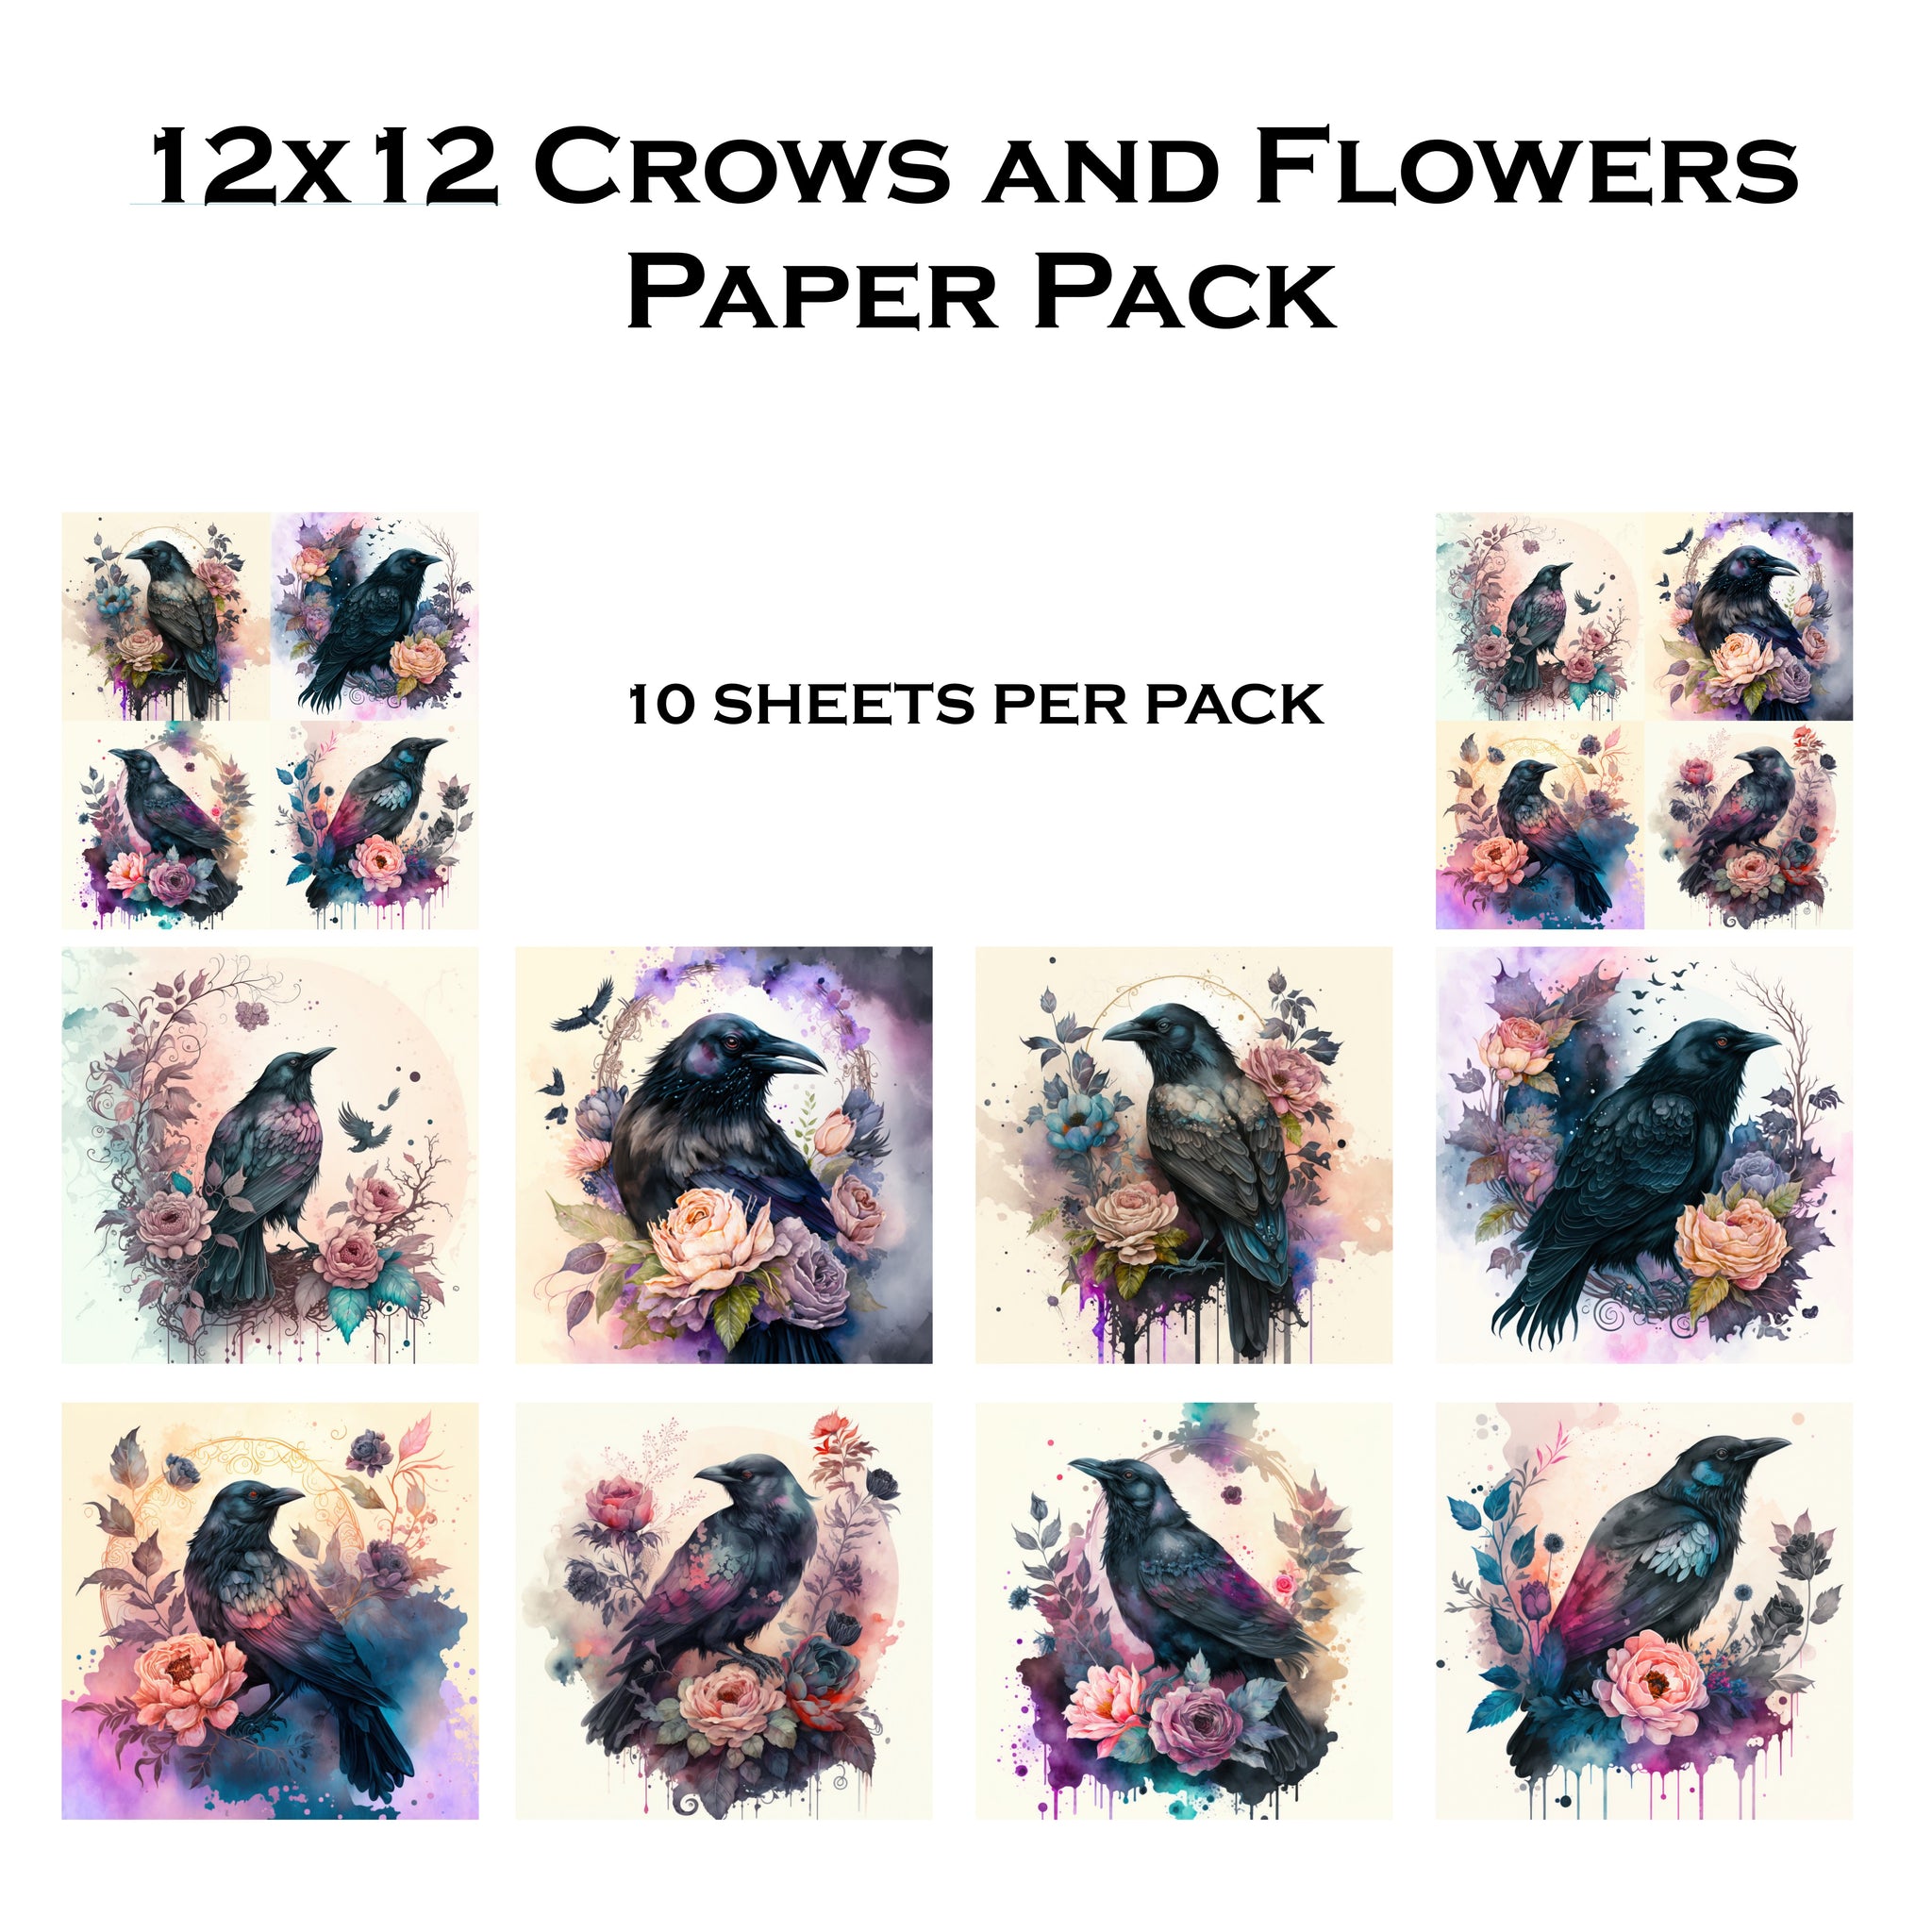 Crows and Flowers 12x12 Paper Pack